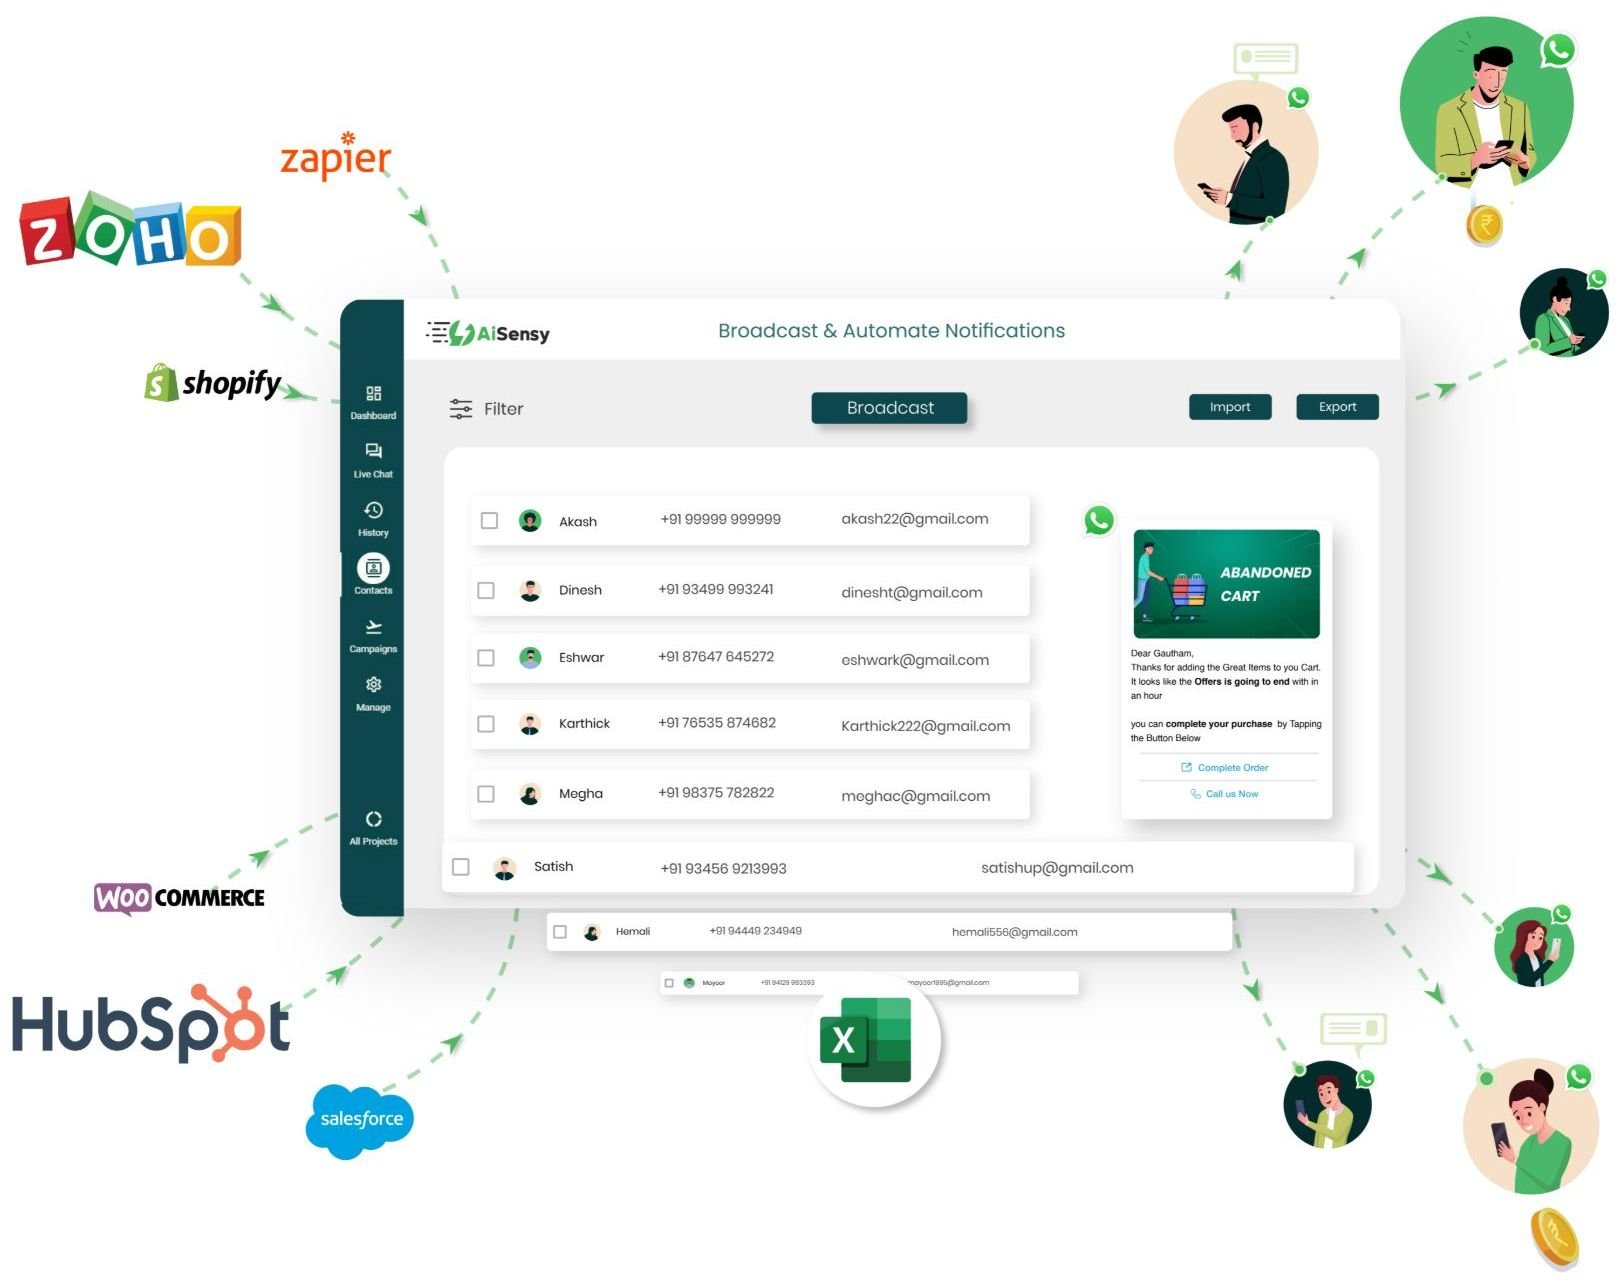 All crm's integrating with AiSensy